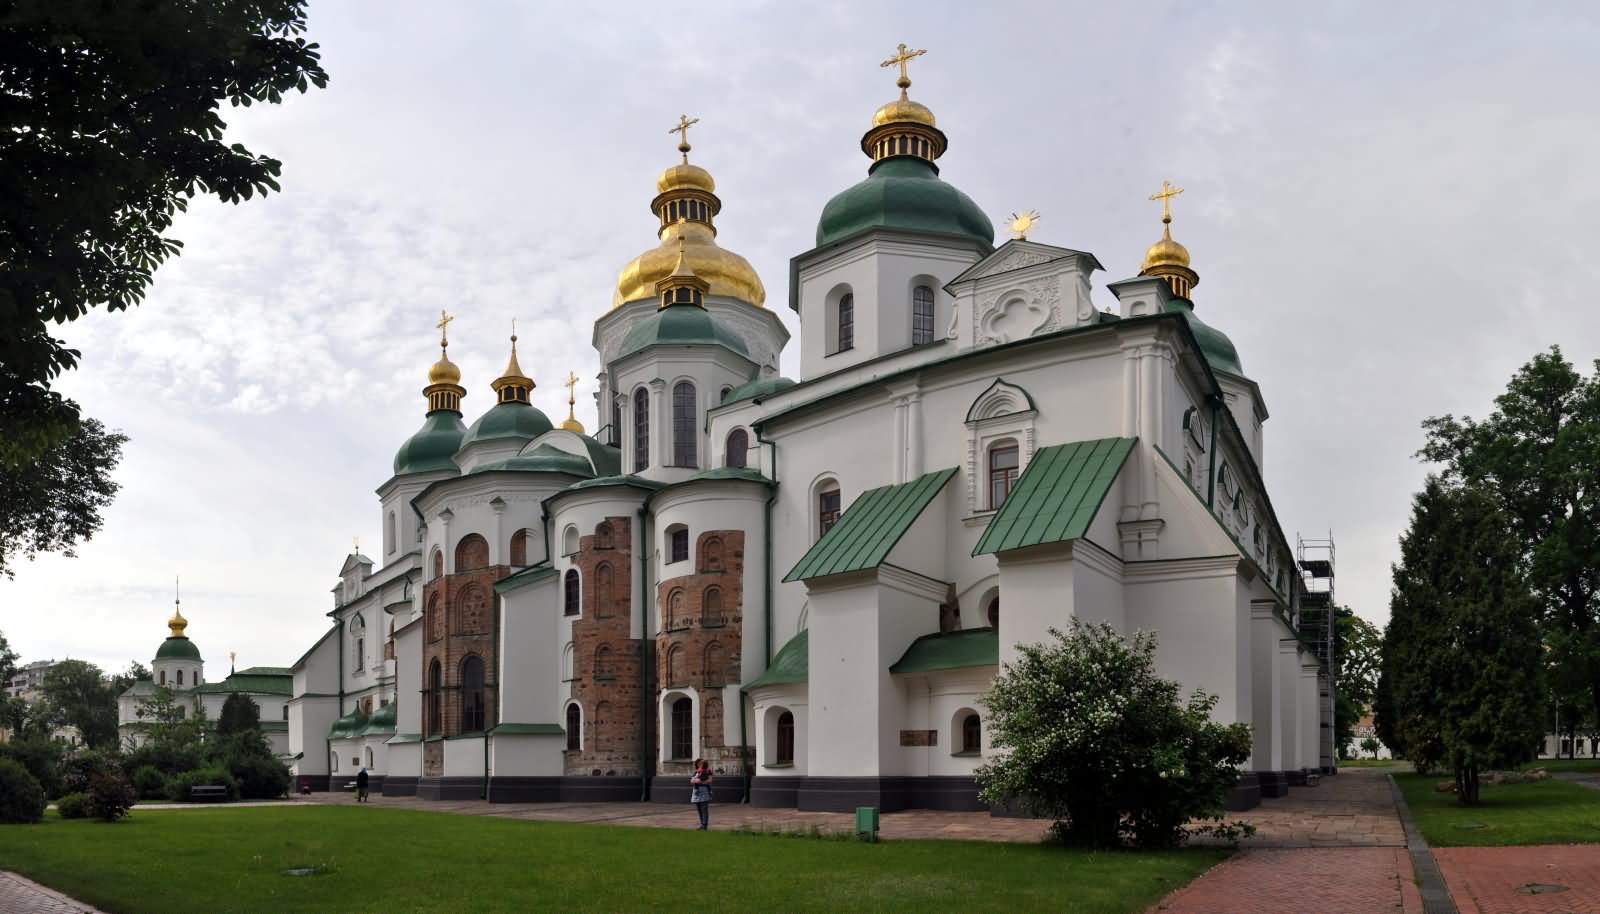 Side Picture Of The Saint Sophia Cathedral In Kiev